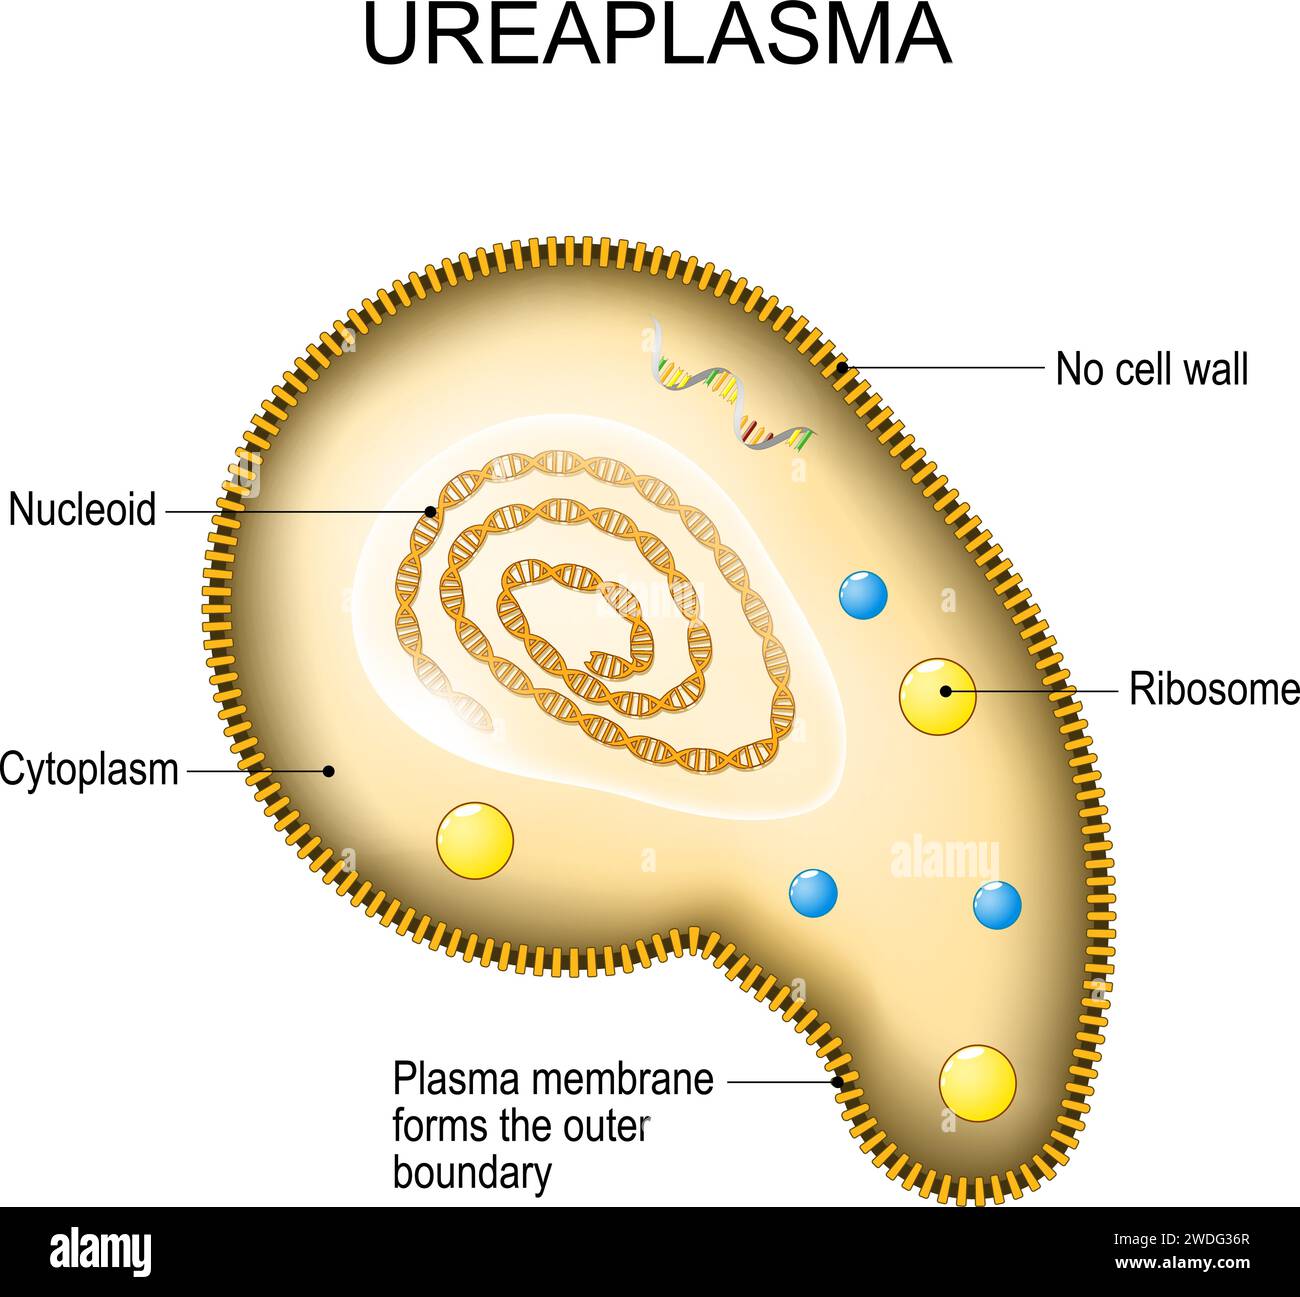 Ureaplasma anatomy. Cell structure of bacteria Mycoplasma. the bacterium is the causative agent of sexually transmitted diseases. Reproductive health. Stock Vector